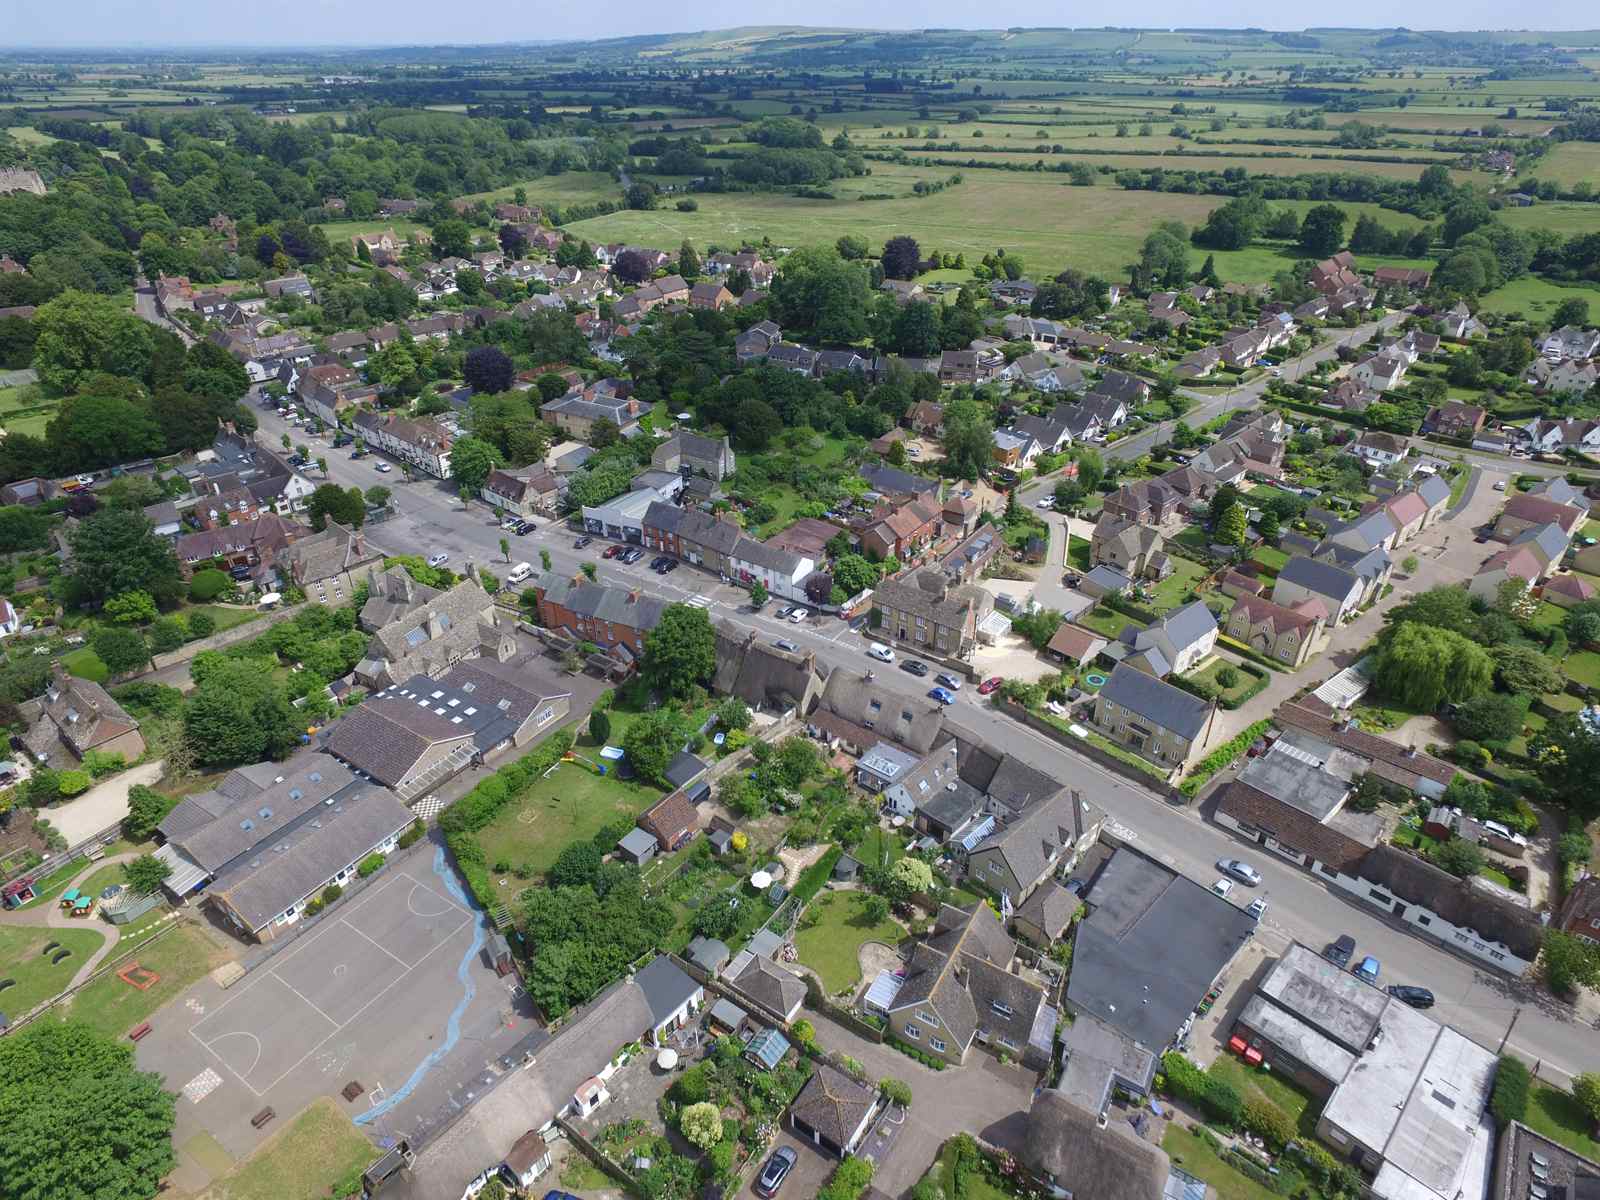 The centre of Shrivenham from the air. Photo by Neil B. Maw 